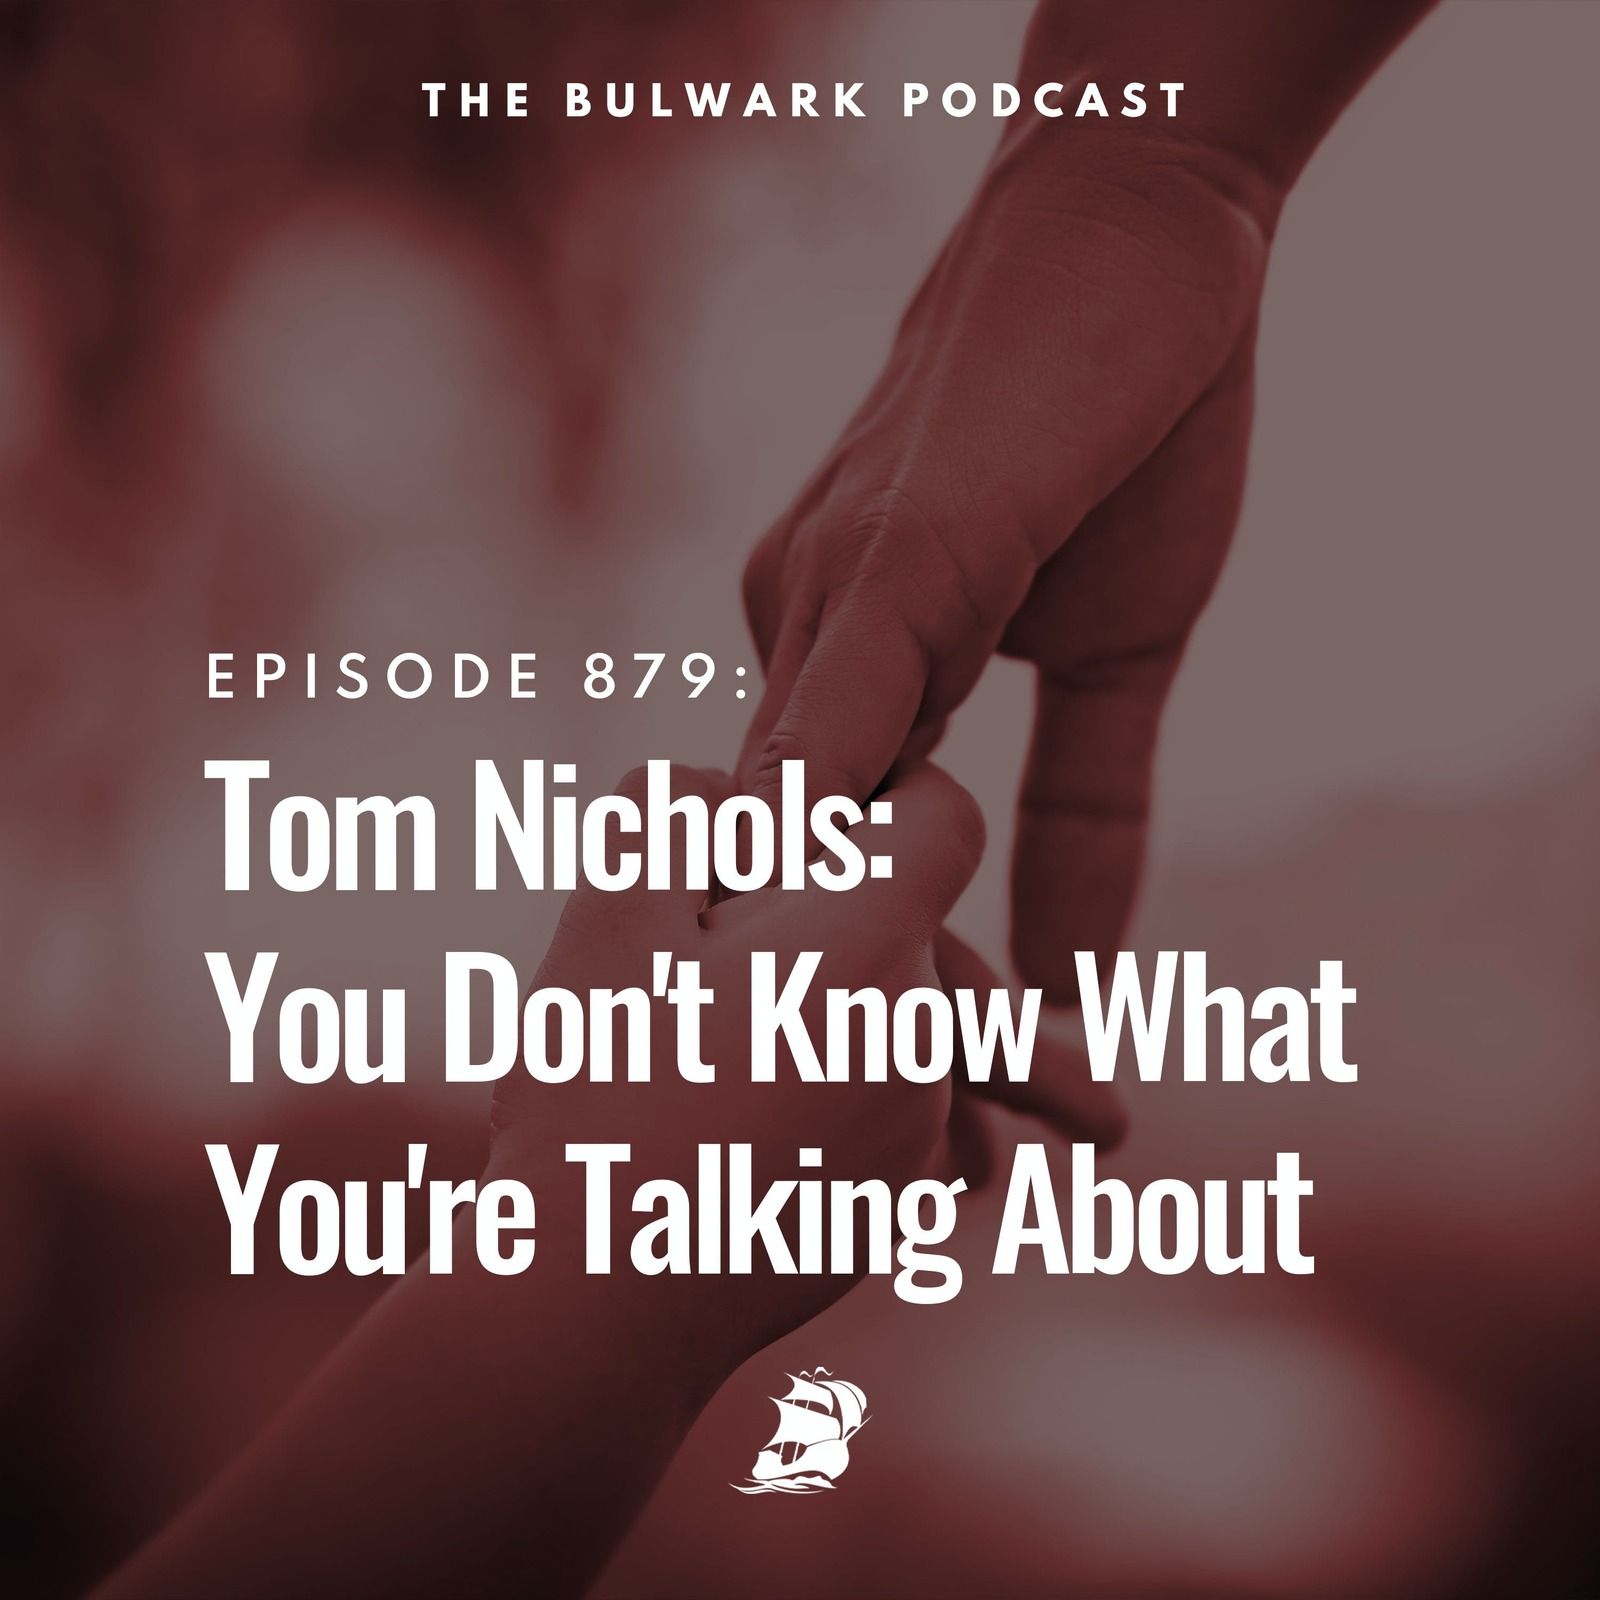 Tom Nichols: You Don't Know What You're Talking About by The Bulwark Podcast